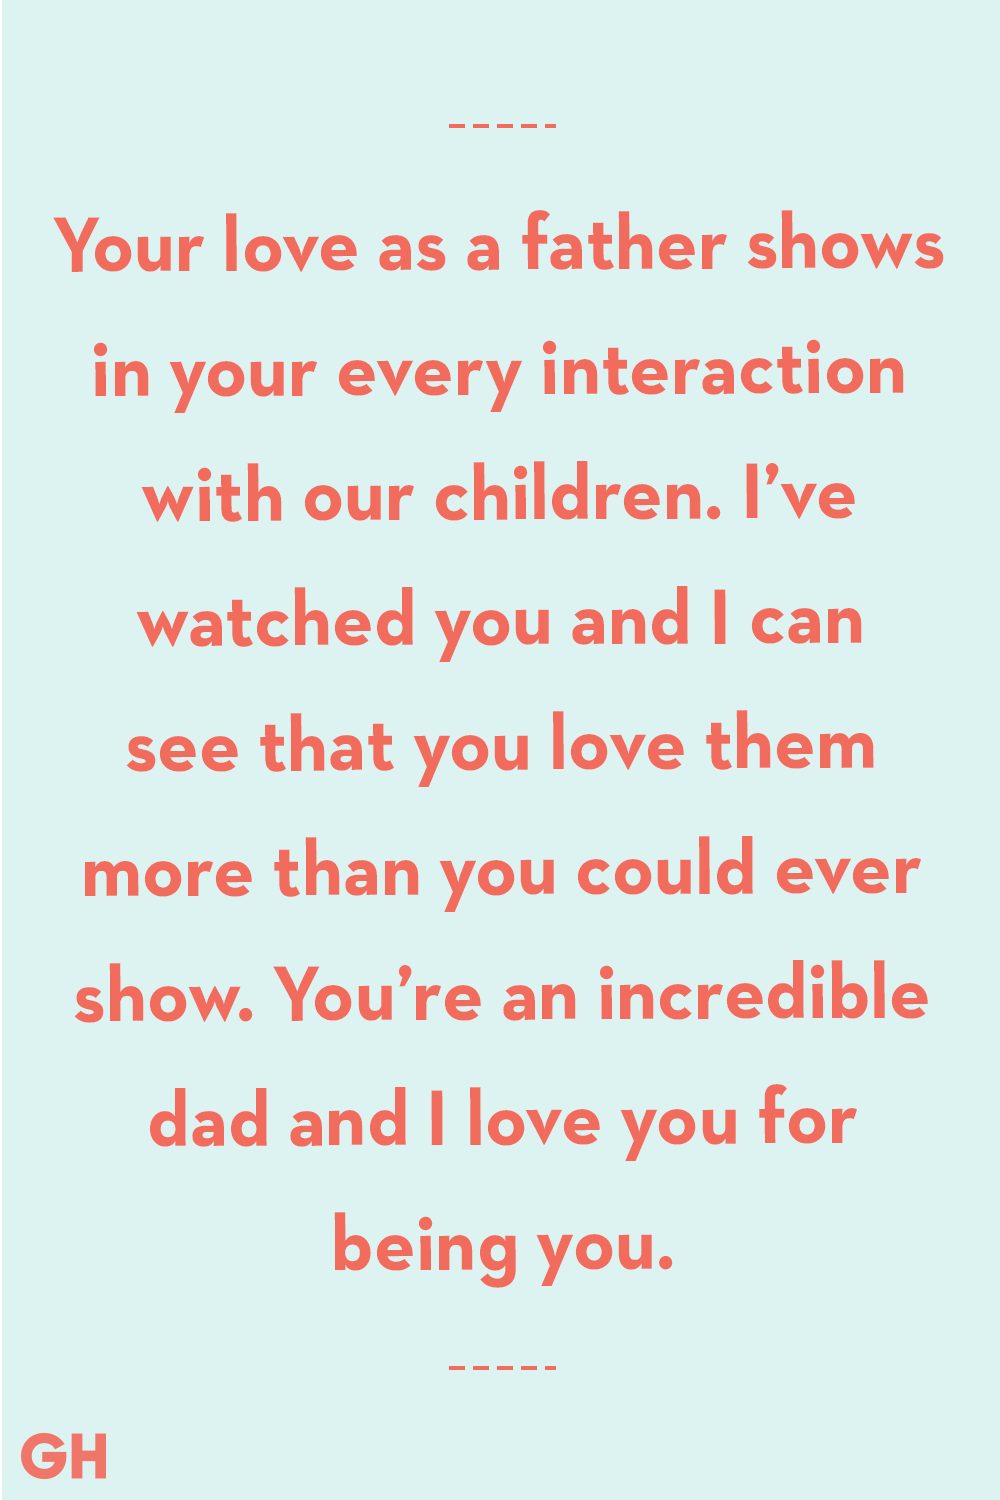 fathers-day-poems-and-quotes-from-wife-quotesgram-fathers-day-poem